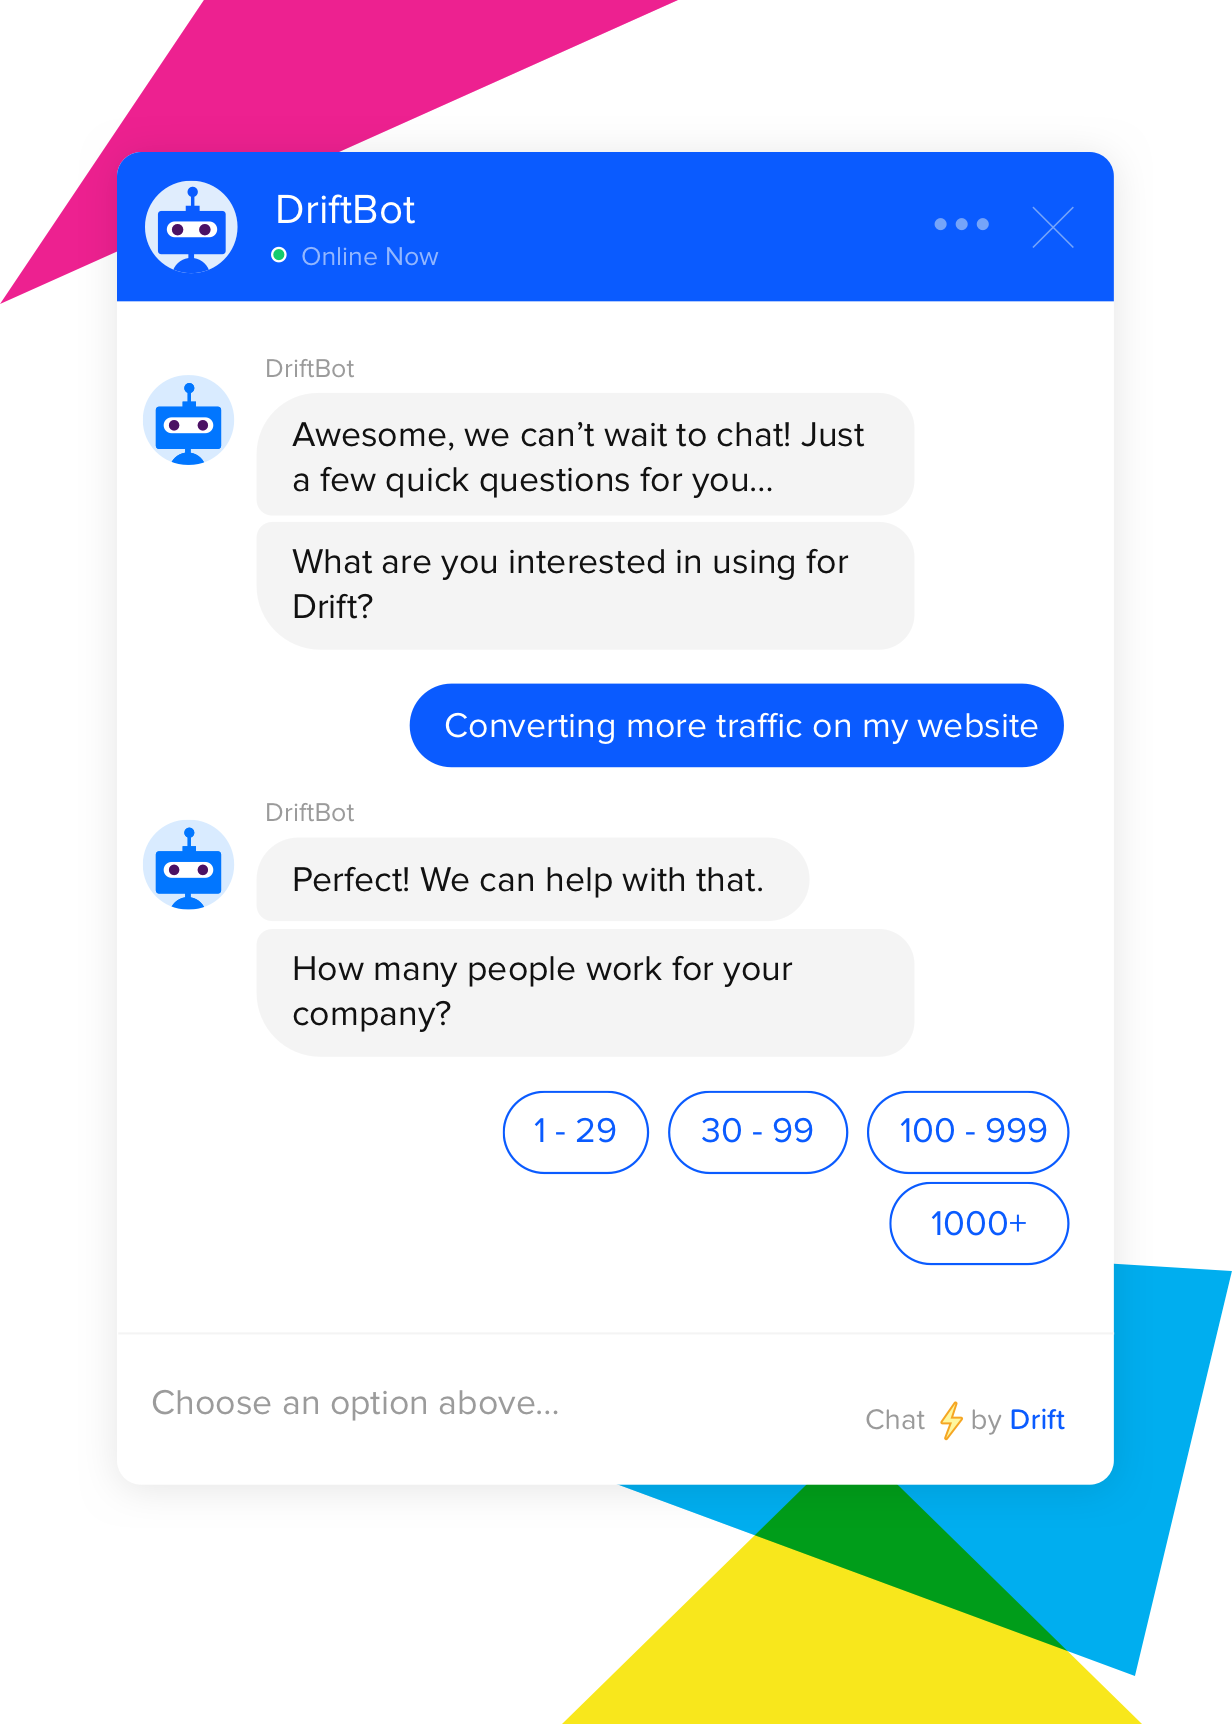 To target a B2B buyer persona, brands can use Chatbots instead of lead forms